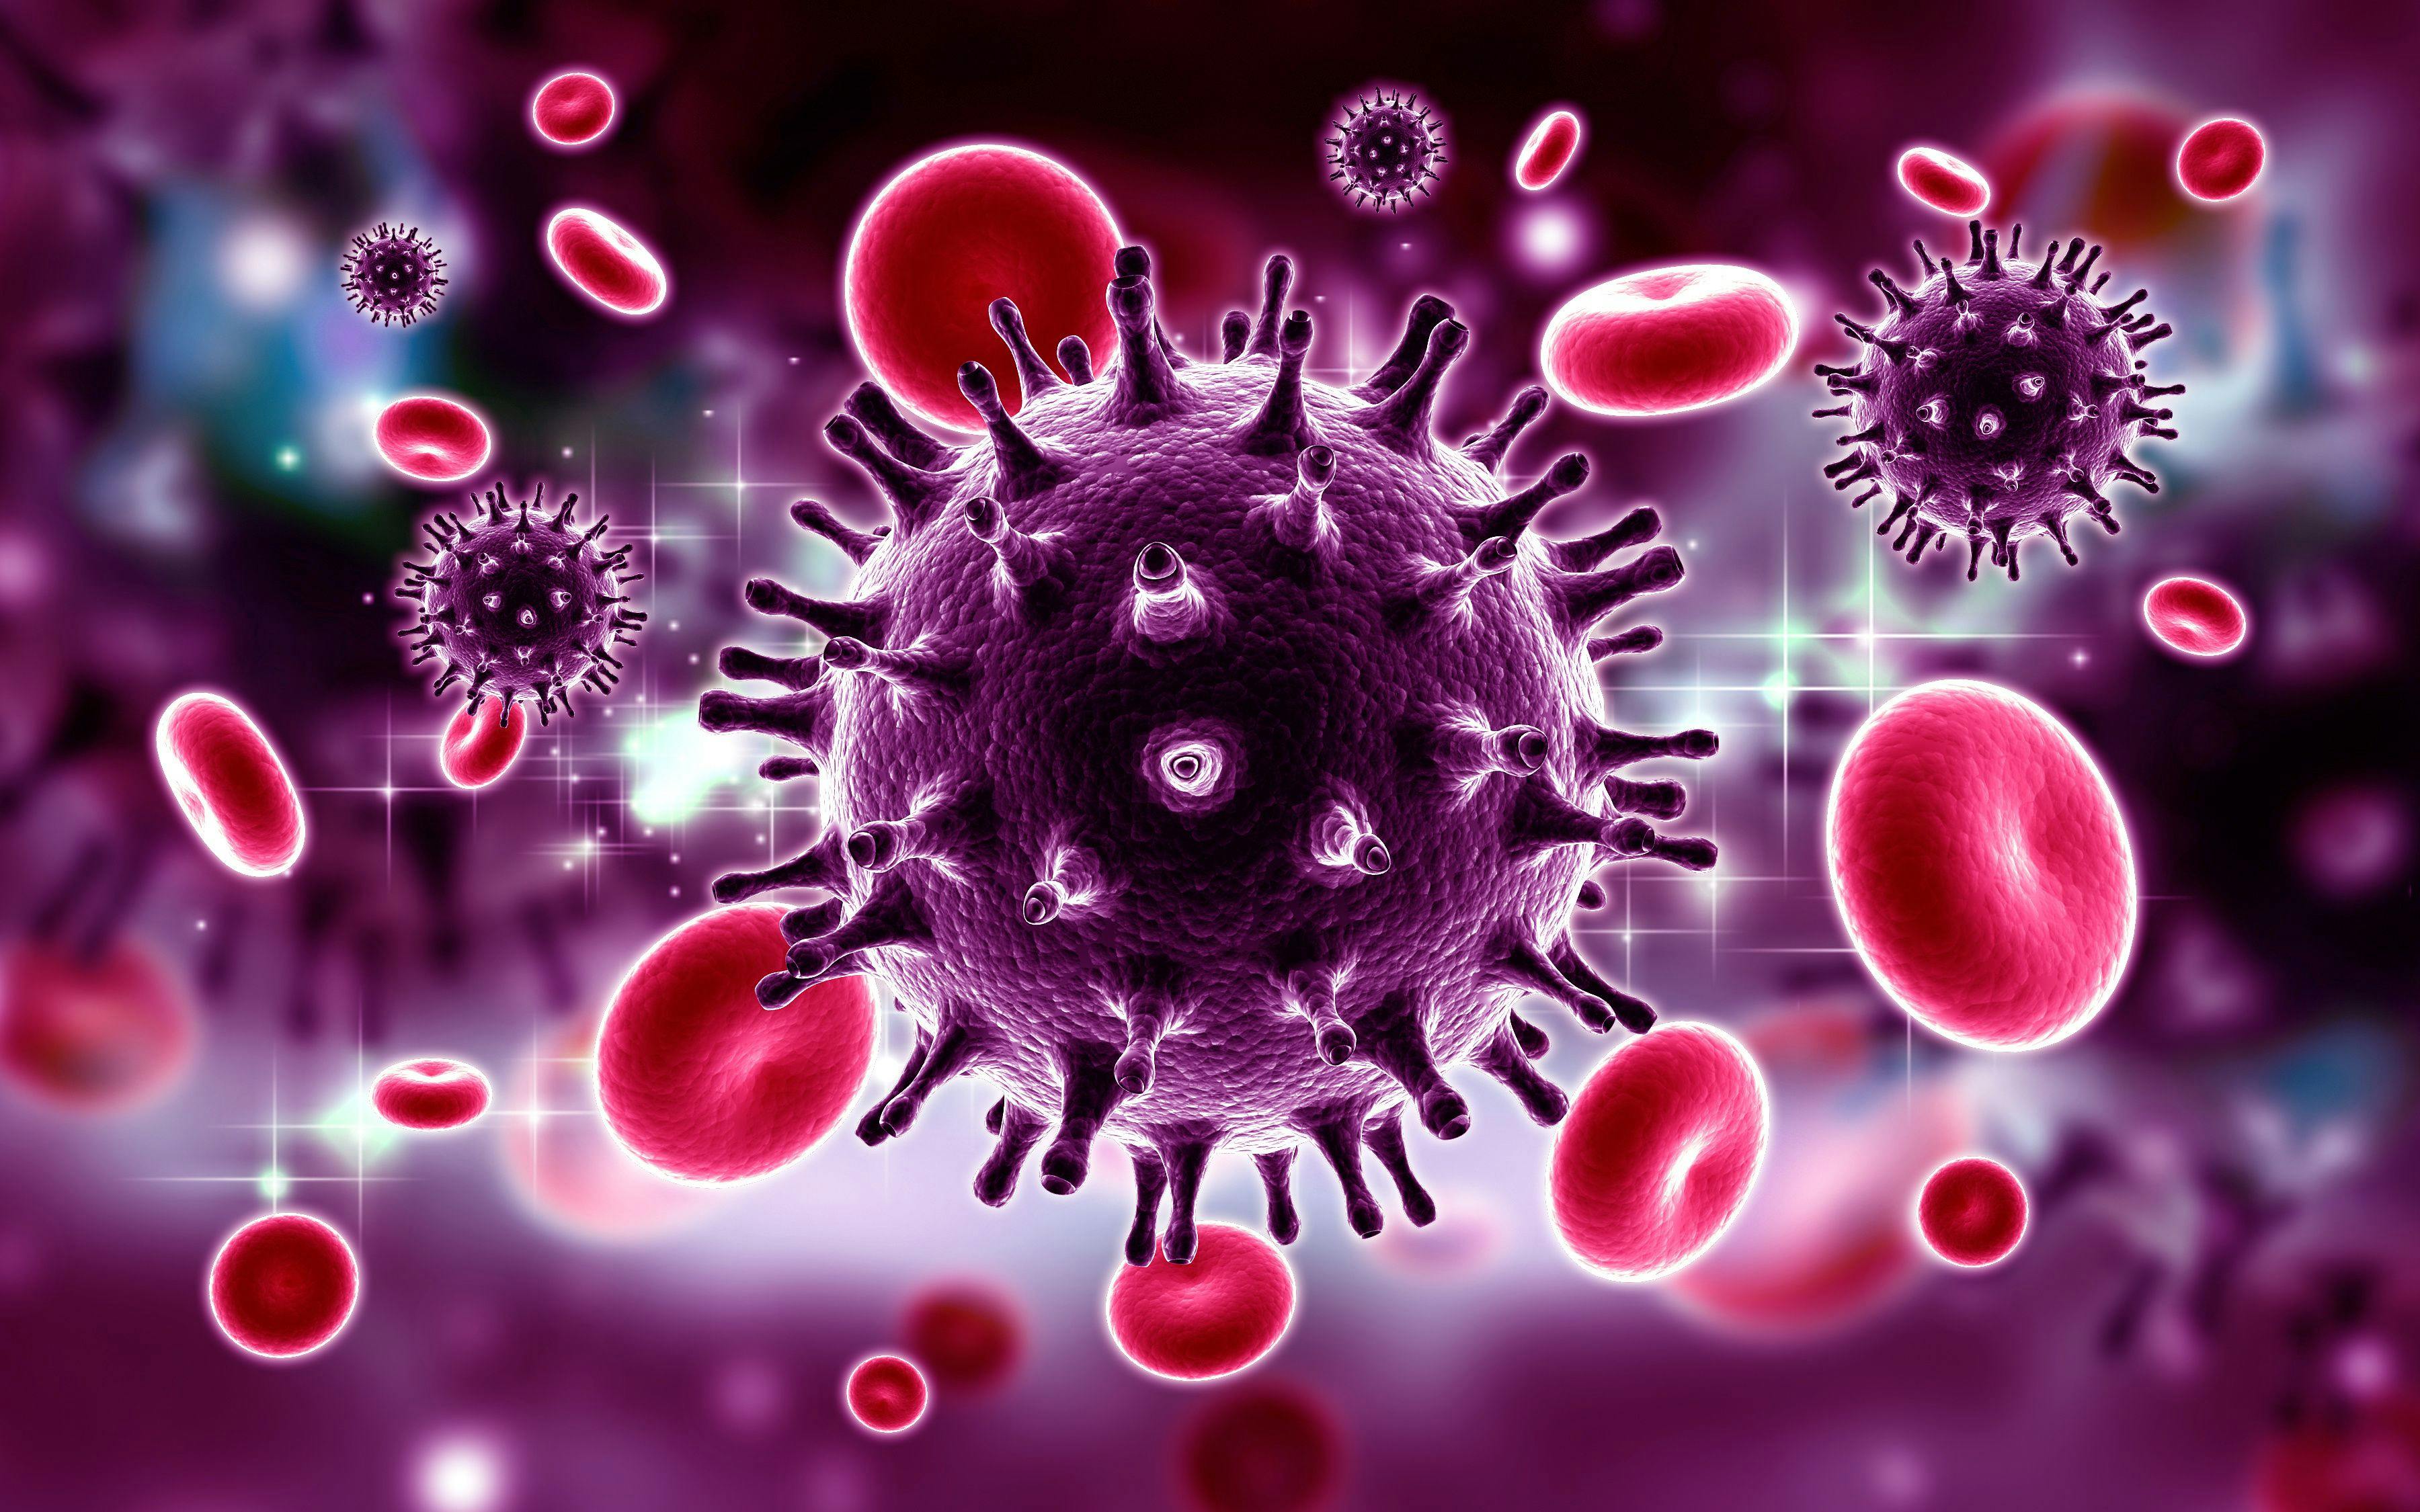 3d rendered HIV Virus in Blood Stream in color background | Image Credit: RAJCREATIONZS - stock.adobe.com